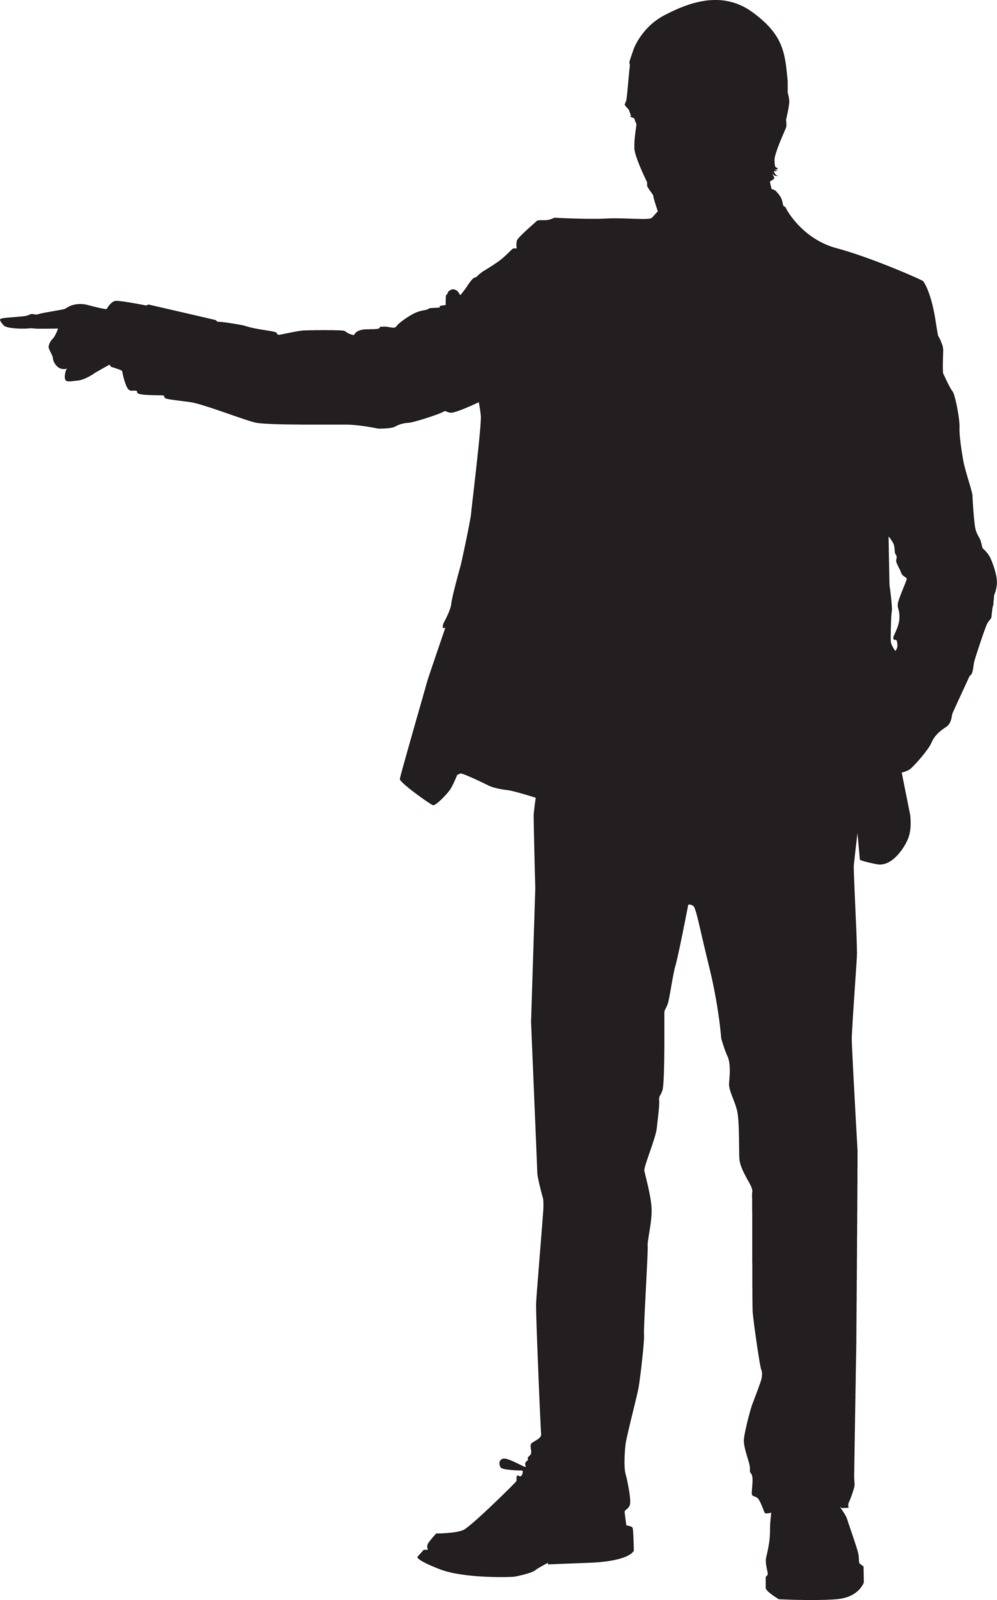 Silhouette of a man pointing with his finger, illustration, vector on white background.